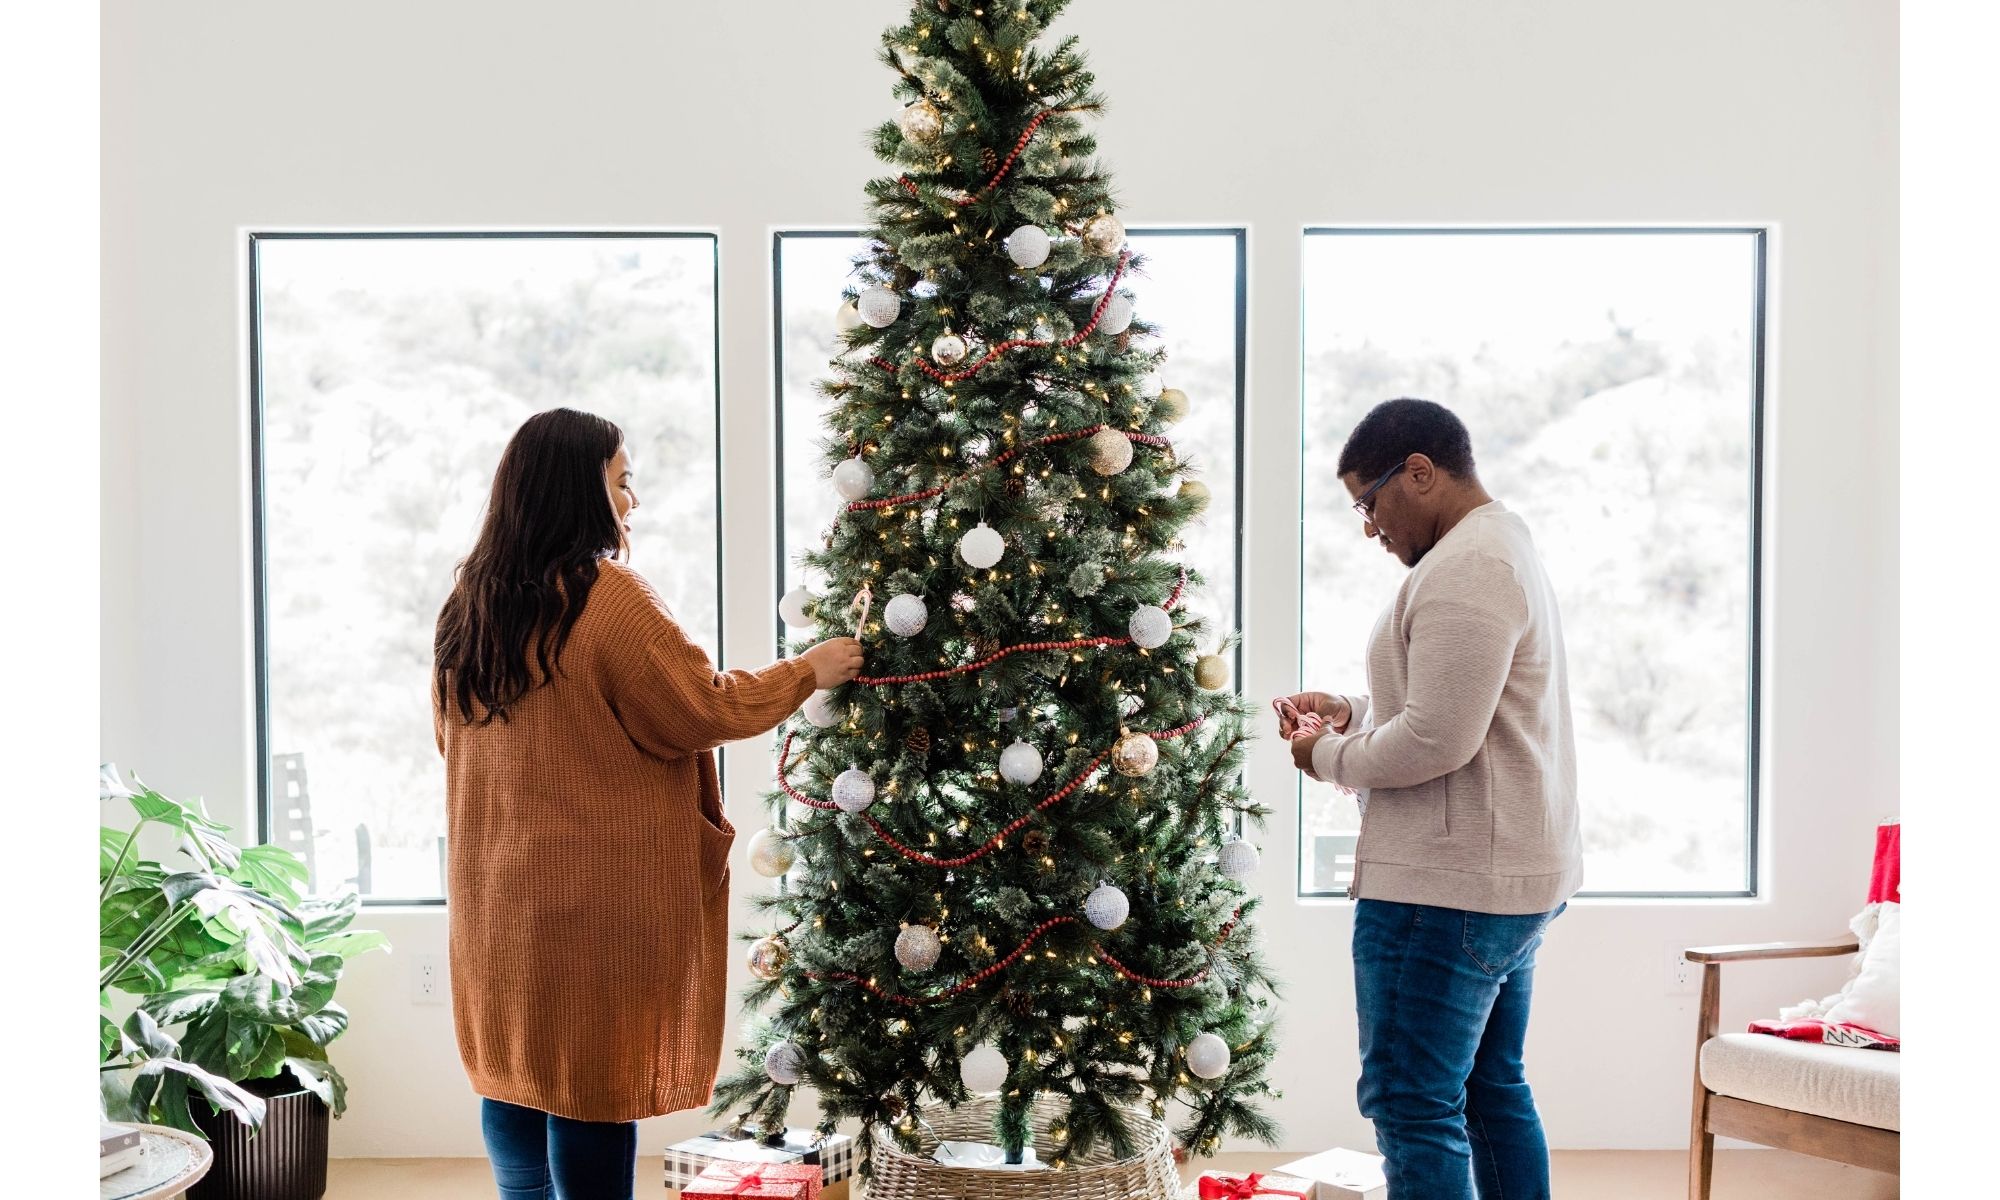 Man and woman decorating the Christmas tree